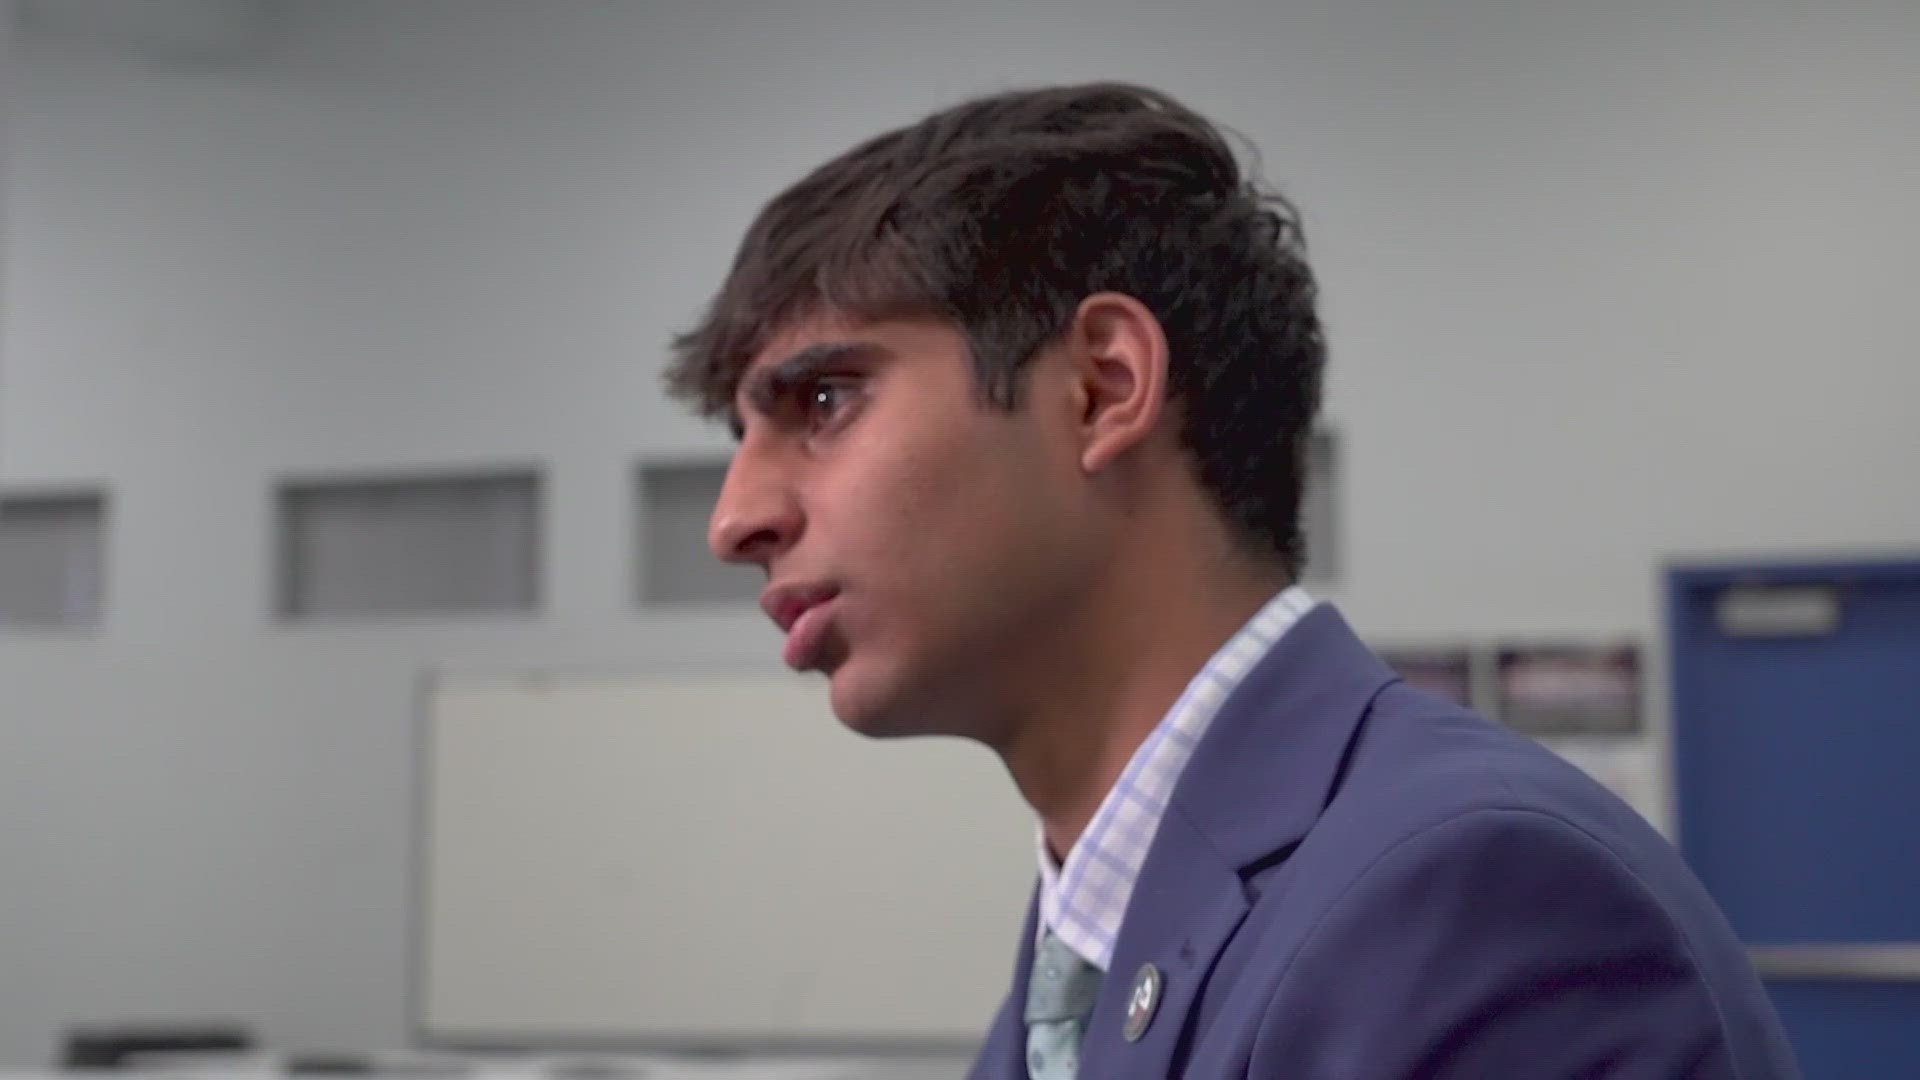 Plano West senior Rizwan Khan started the group as a way to talk about hard things.